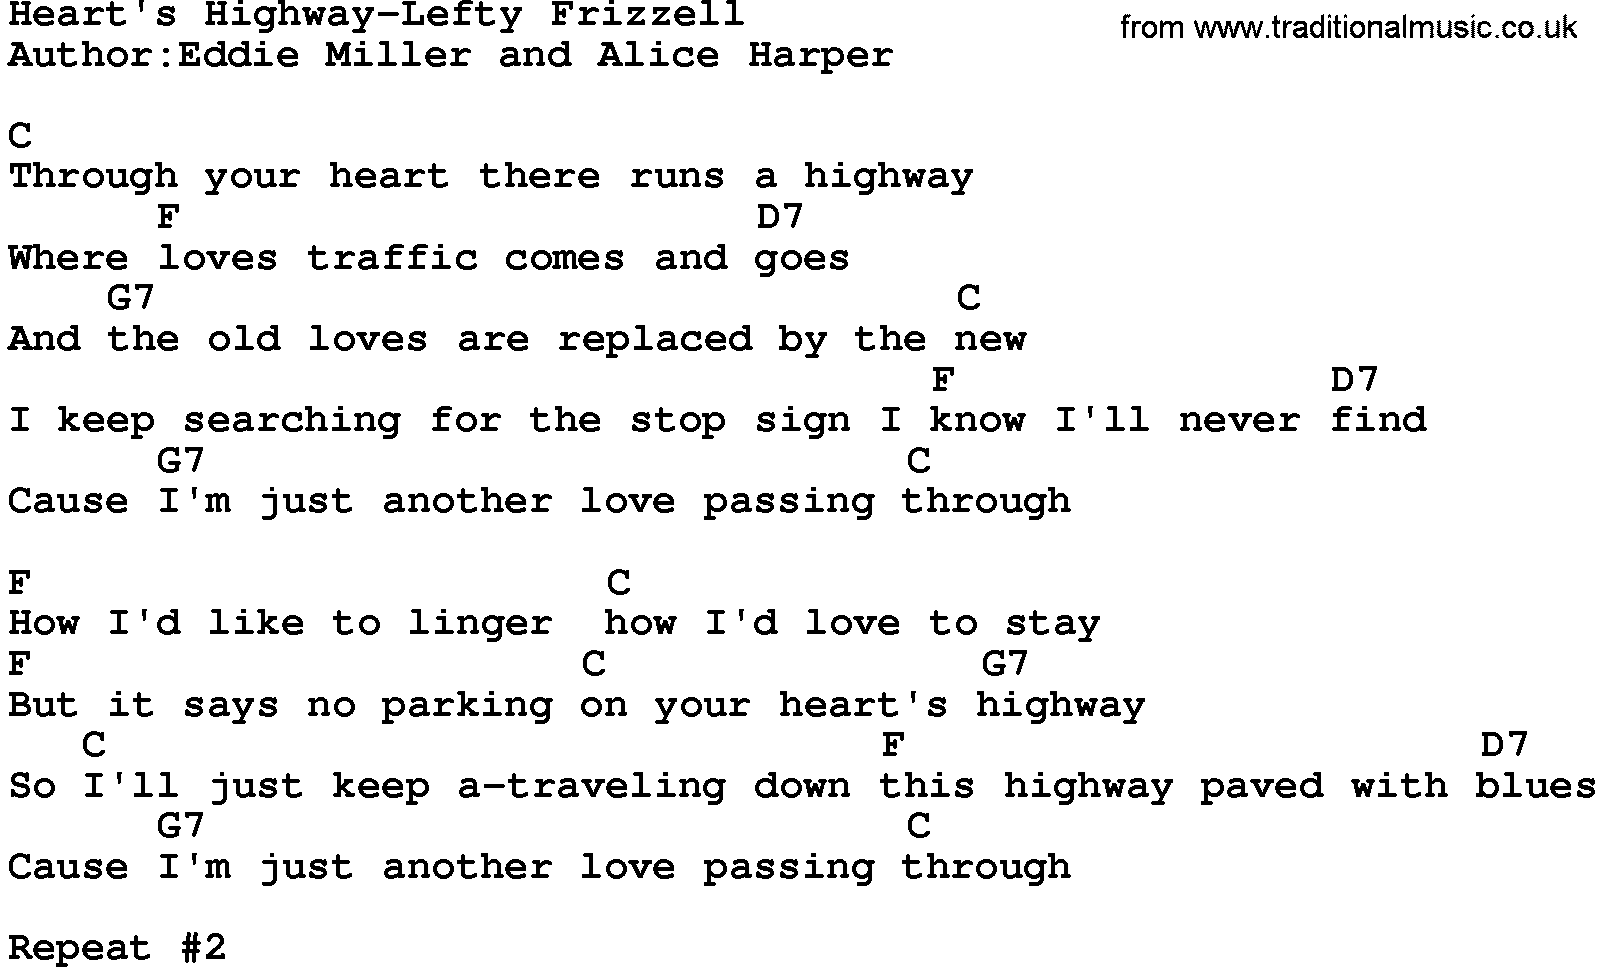 Country music song: Heart's Highway-Lefty Frizzell lyrics and chords